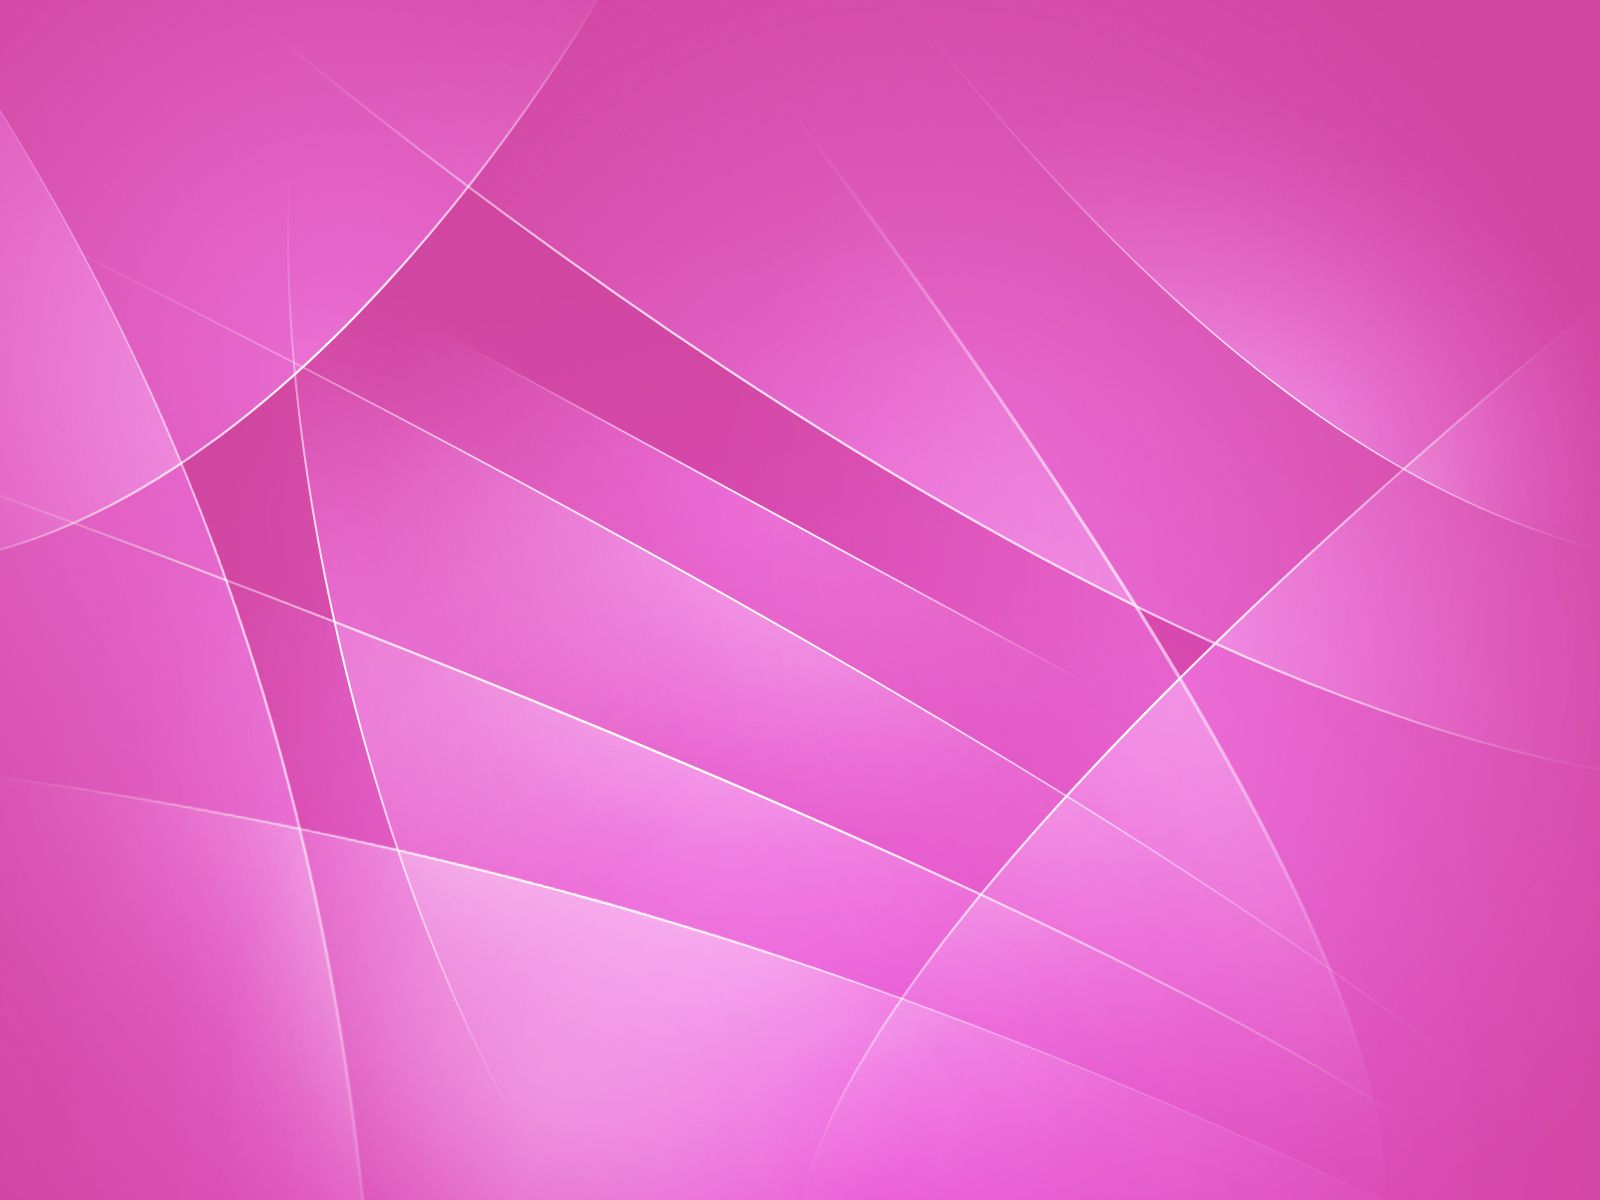 Pink Color Widescreen Desktop Backgrounds Pic Mch095165 - Free Background Pink 4k - HD Wallpaper 